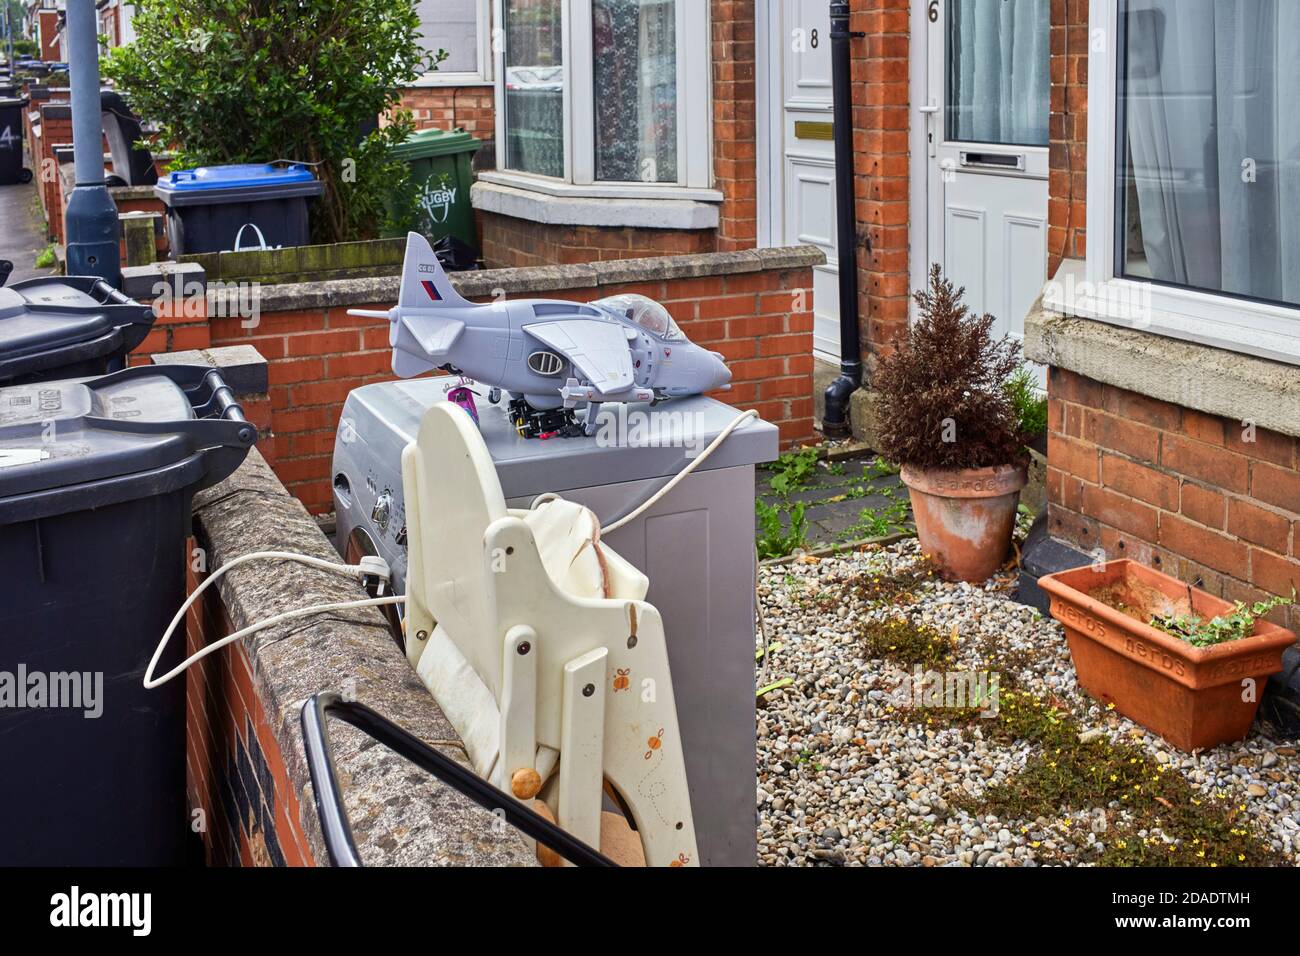 Rubbish including a plastic toy airplane in front garden of a terraced house Stock Photo